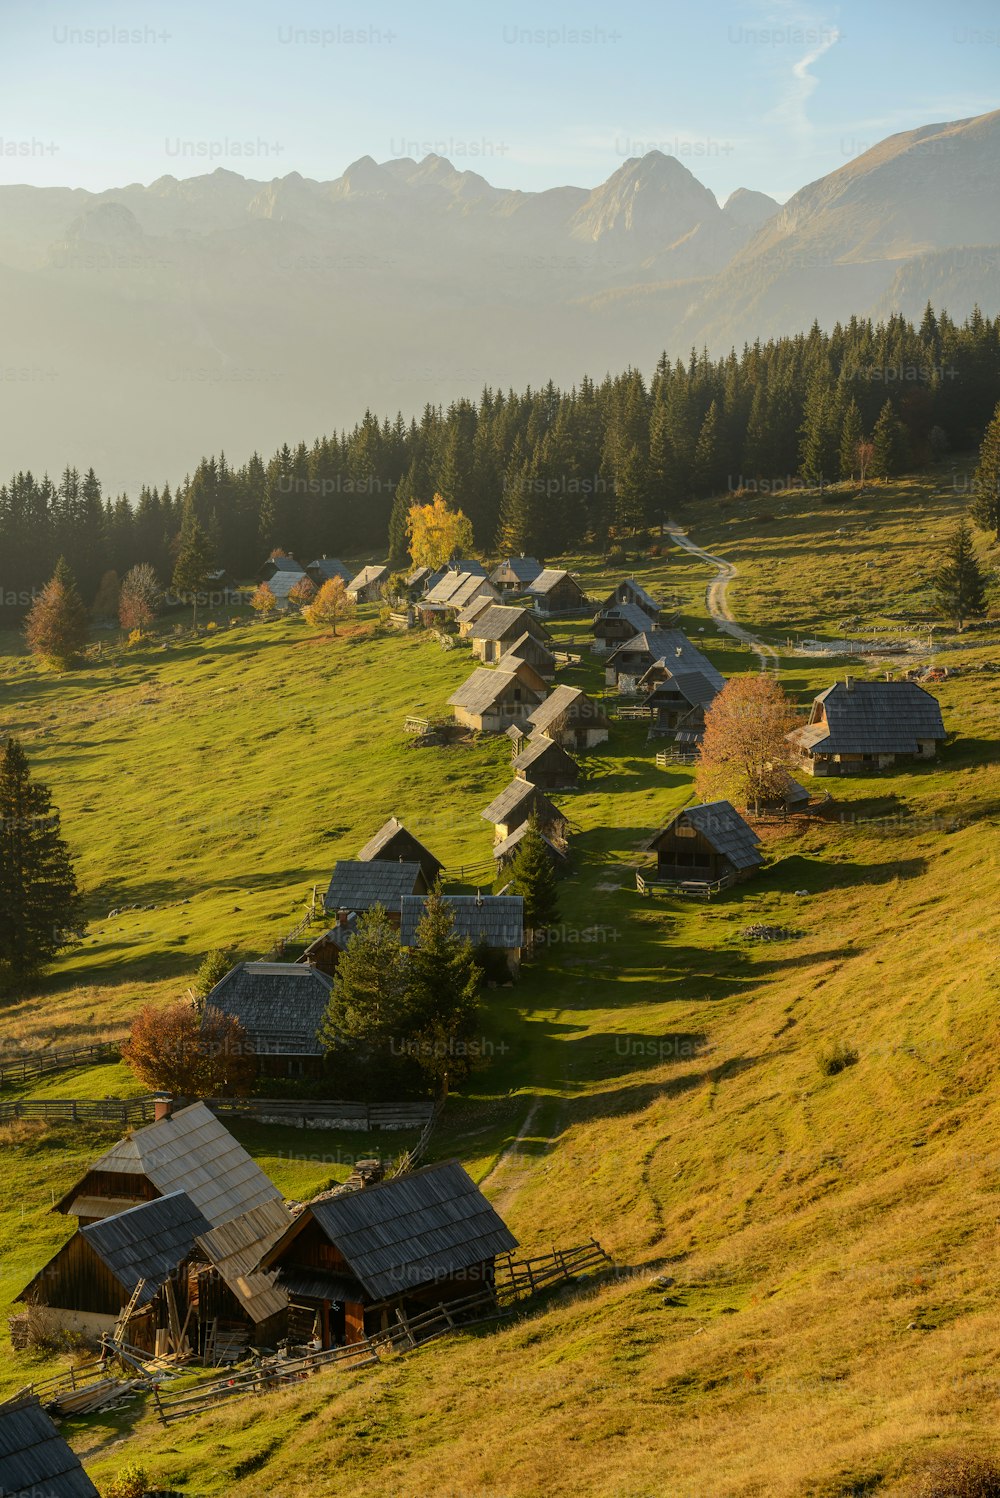 a small village in the middle of a grassy field